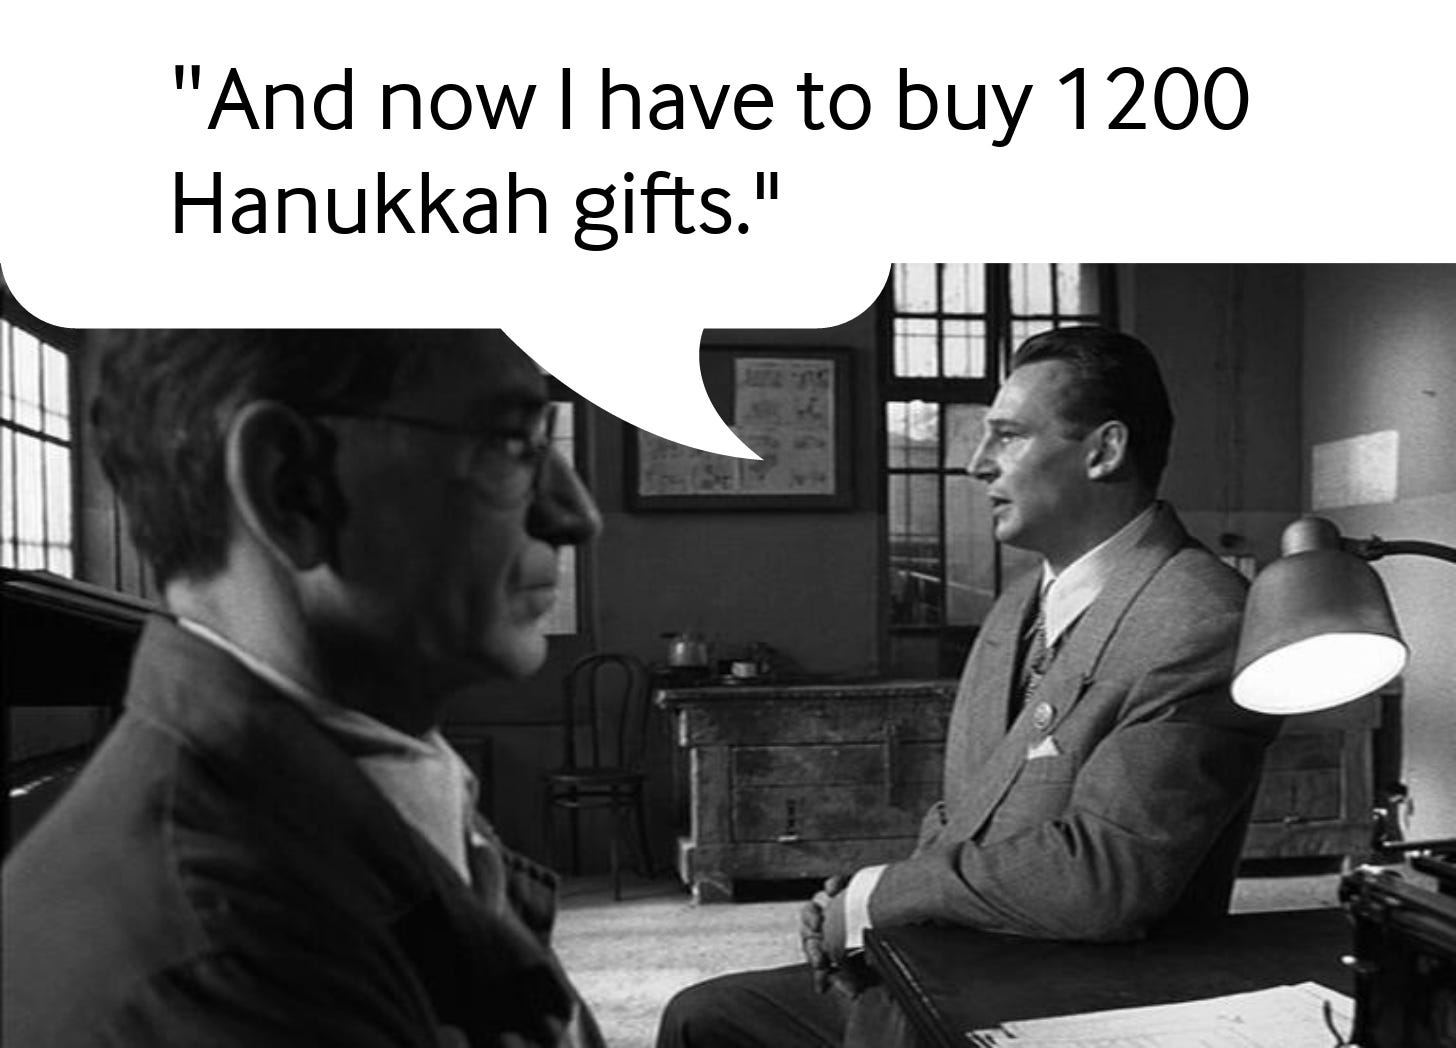 Oskar Schindler grapples with his inner demons while he talks to a guy about how many Hanukkah gifts he needs to buy